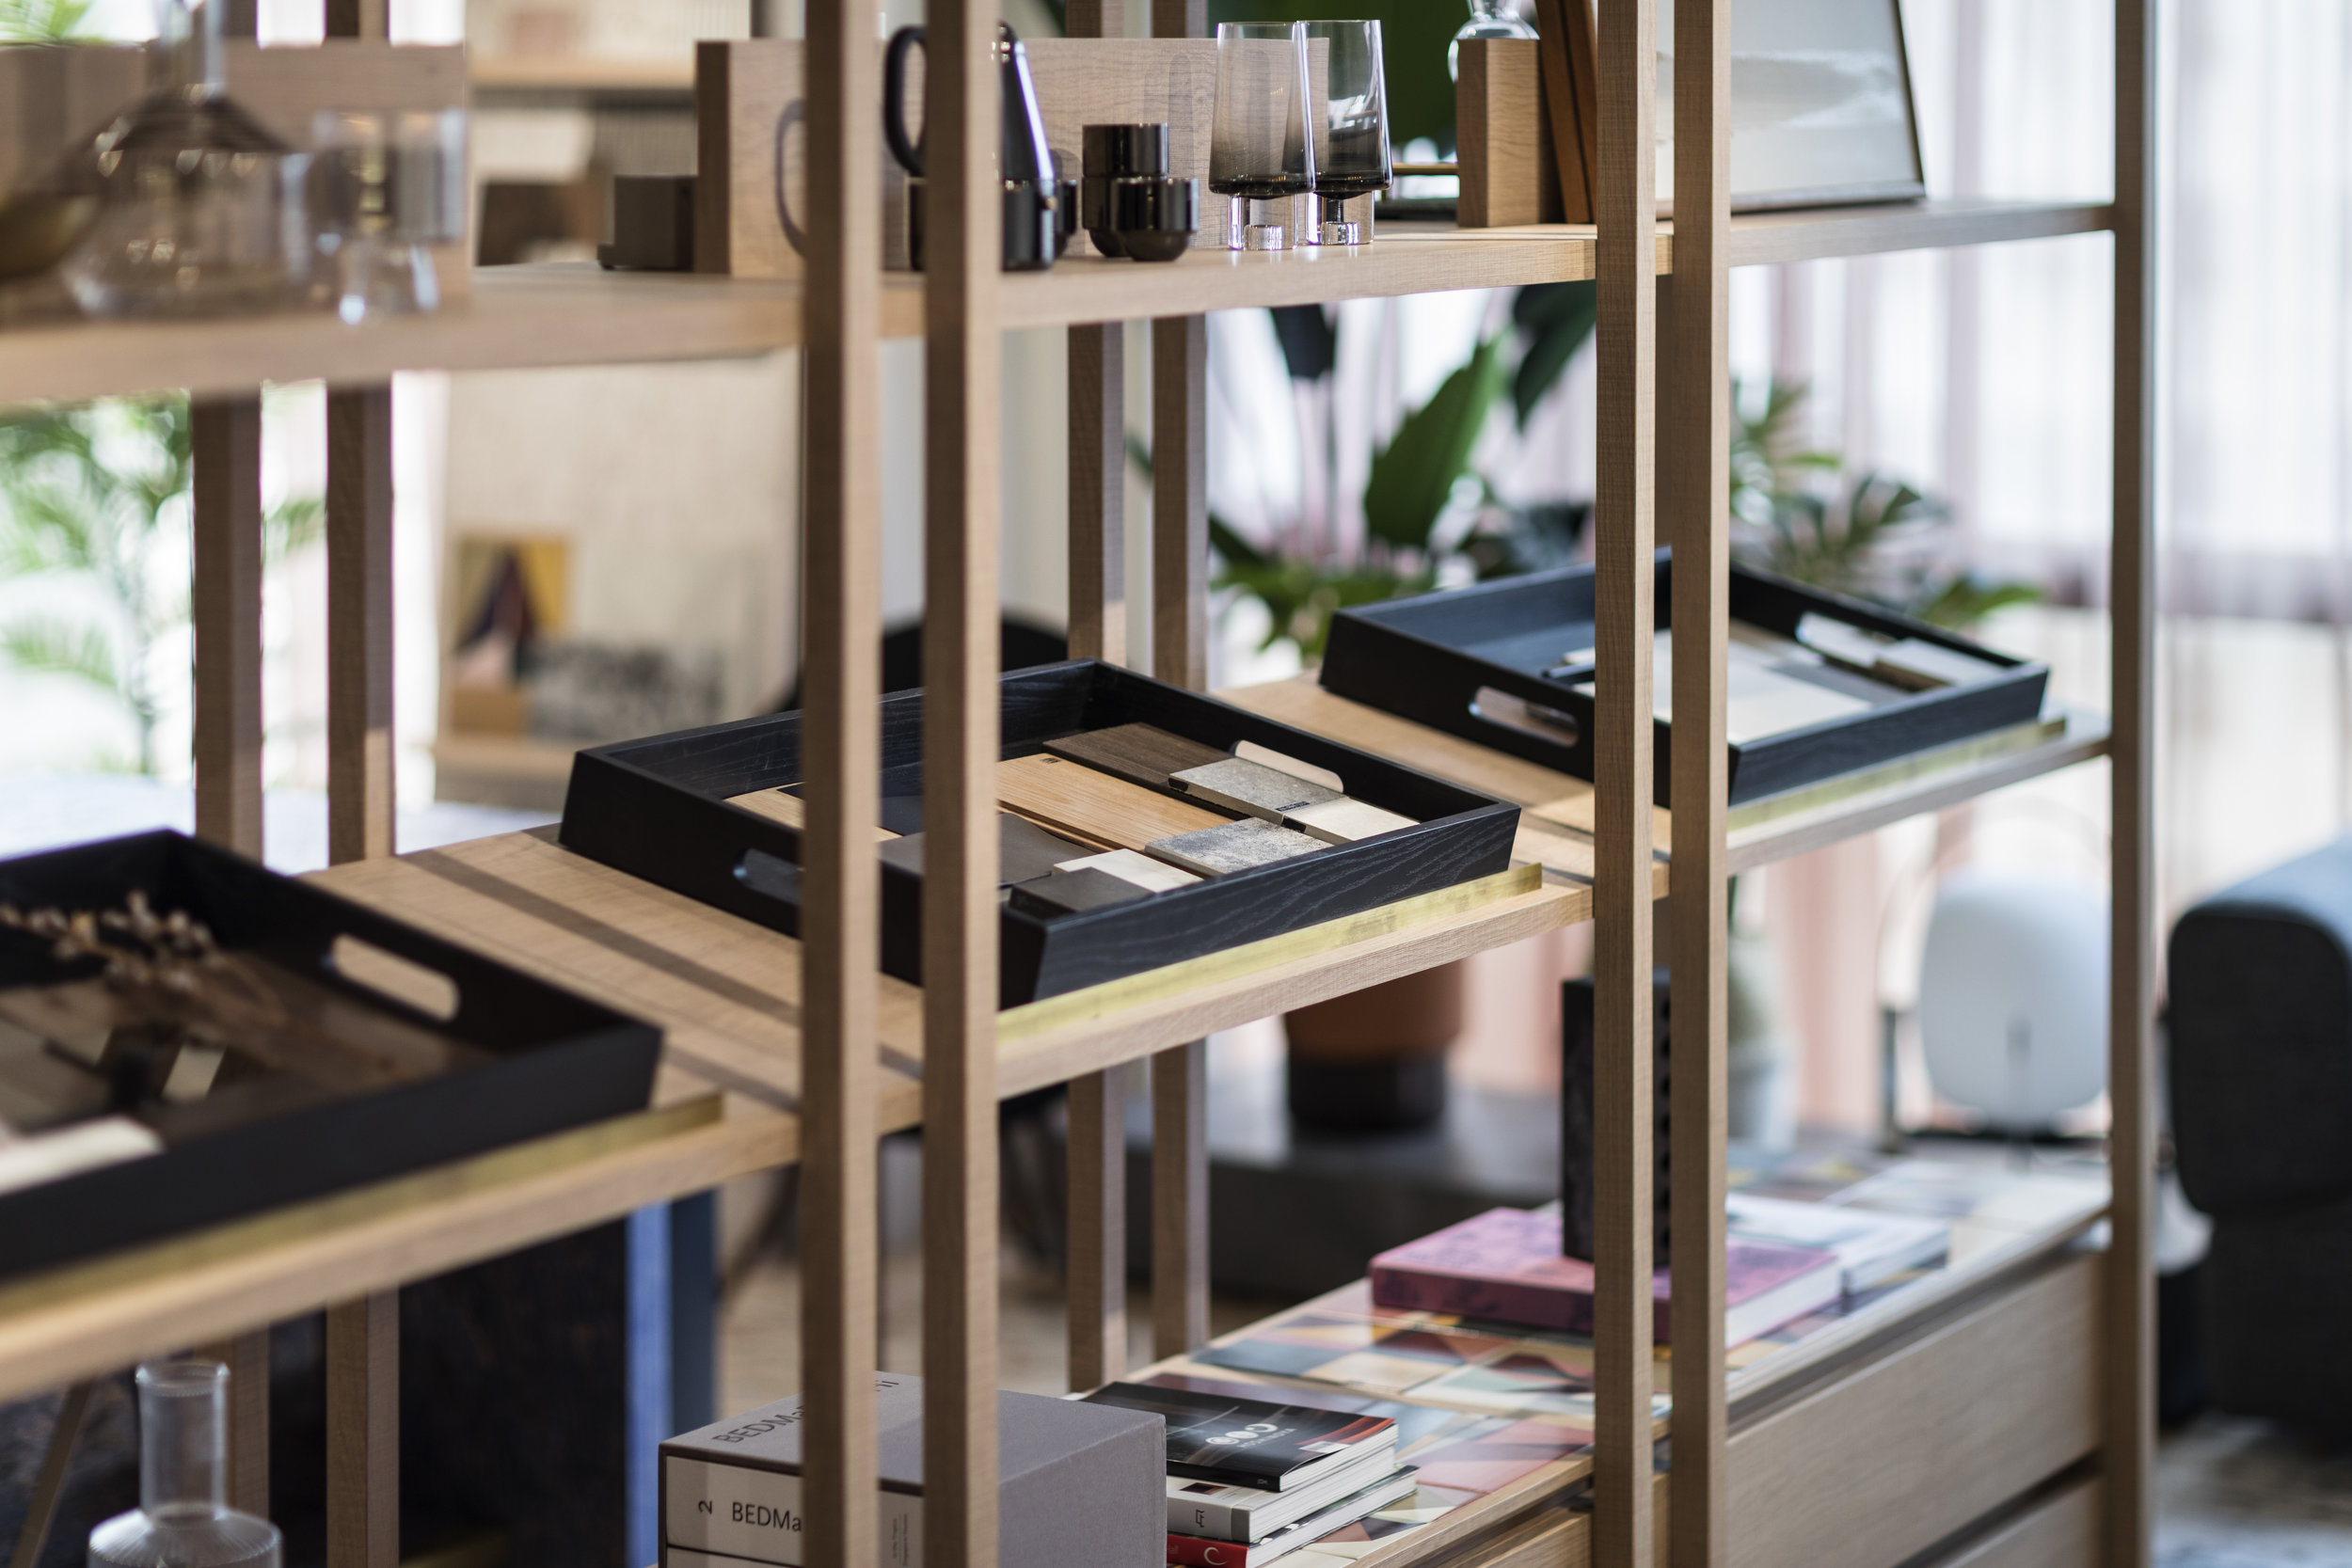  OFFICE / 2018  The open-plan office integrates casual fun through simple materials. Black wood panelling became a main backdrop of the office as well as hiding the facilities behind. The open shelves cum material tray holder acts as a separation scr